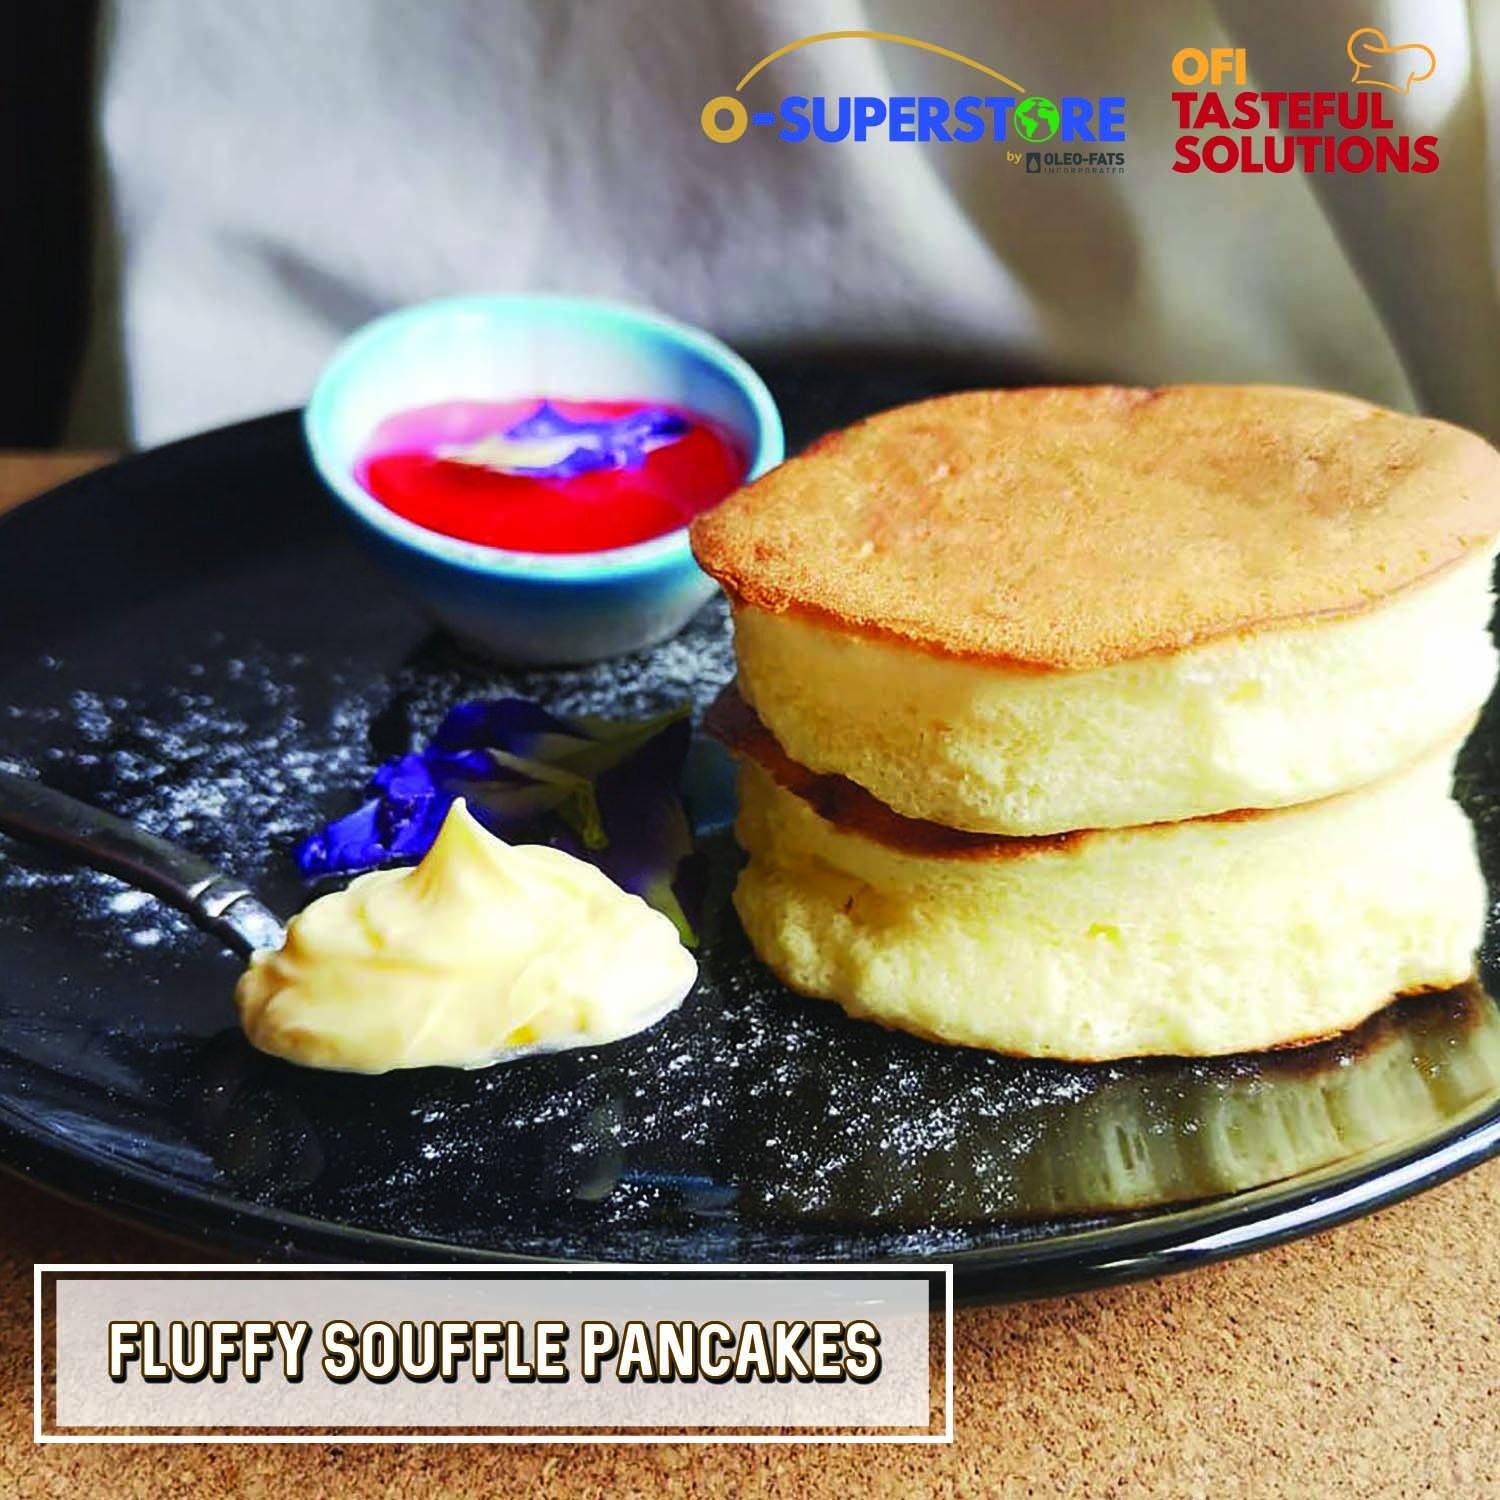 Fluffy Souffle Pancakes - O-SUPERSTORE